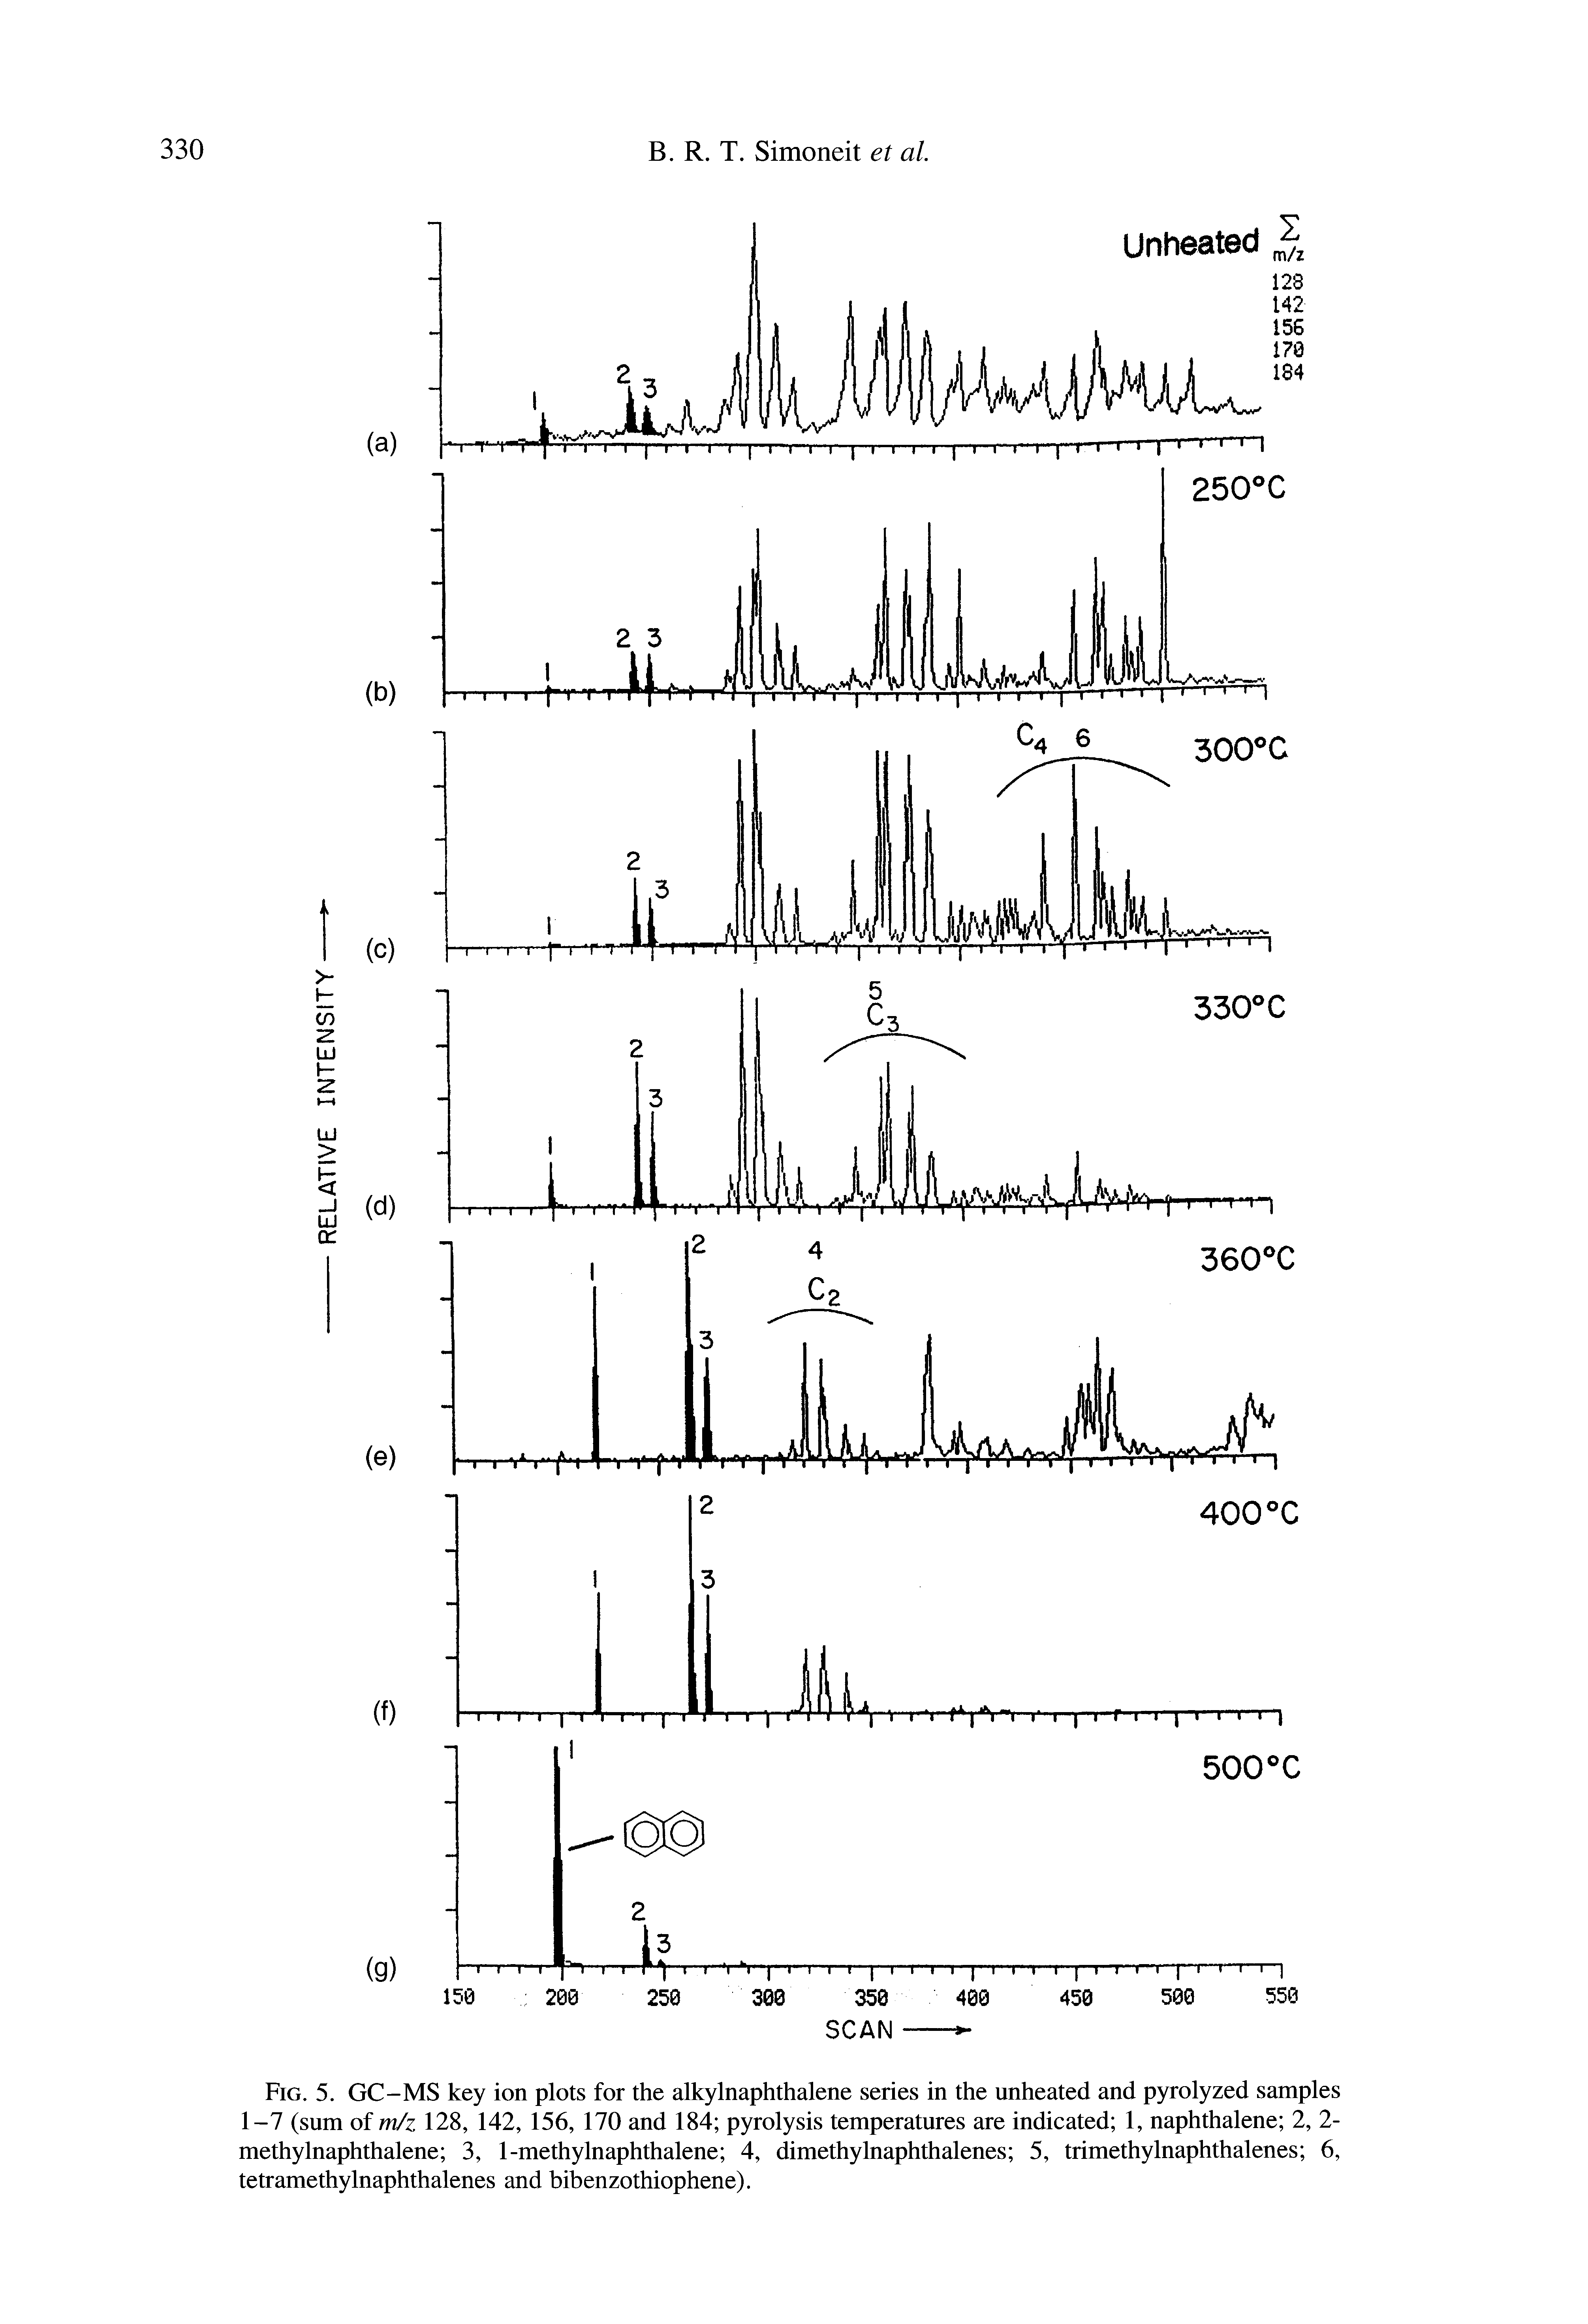 Fig. 5. GC-MS key ion plots for the alkylnaphthalene series in the unheated and pyrolyzed samples 1-7 (sum of m/z 128, 142, 156, 170 and 184 pyrolysis temperatures are indicated 1, naphthalene 2, 2-methylnaphthalene 3, 1-methylnaphthalene 4, dimethylnaphthalenes 5, trimethylnaphthalenes 6, tetramethylnaphthalenes and bibenzothiophene).